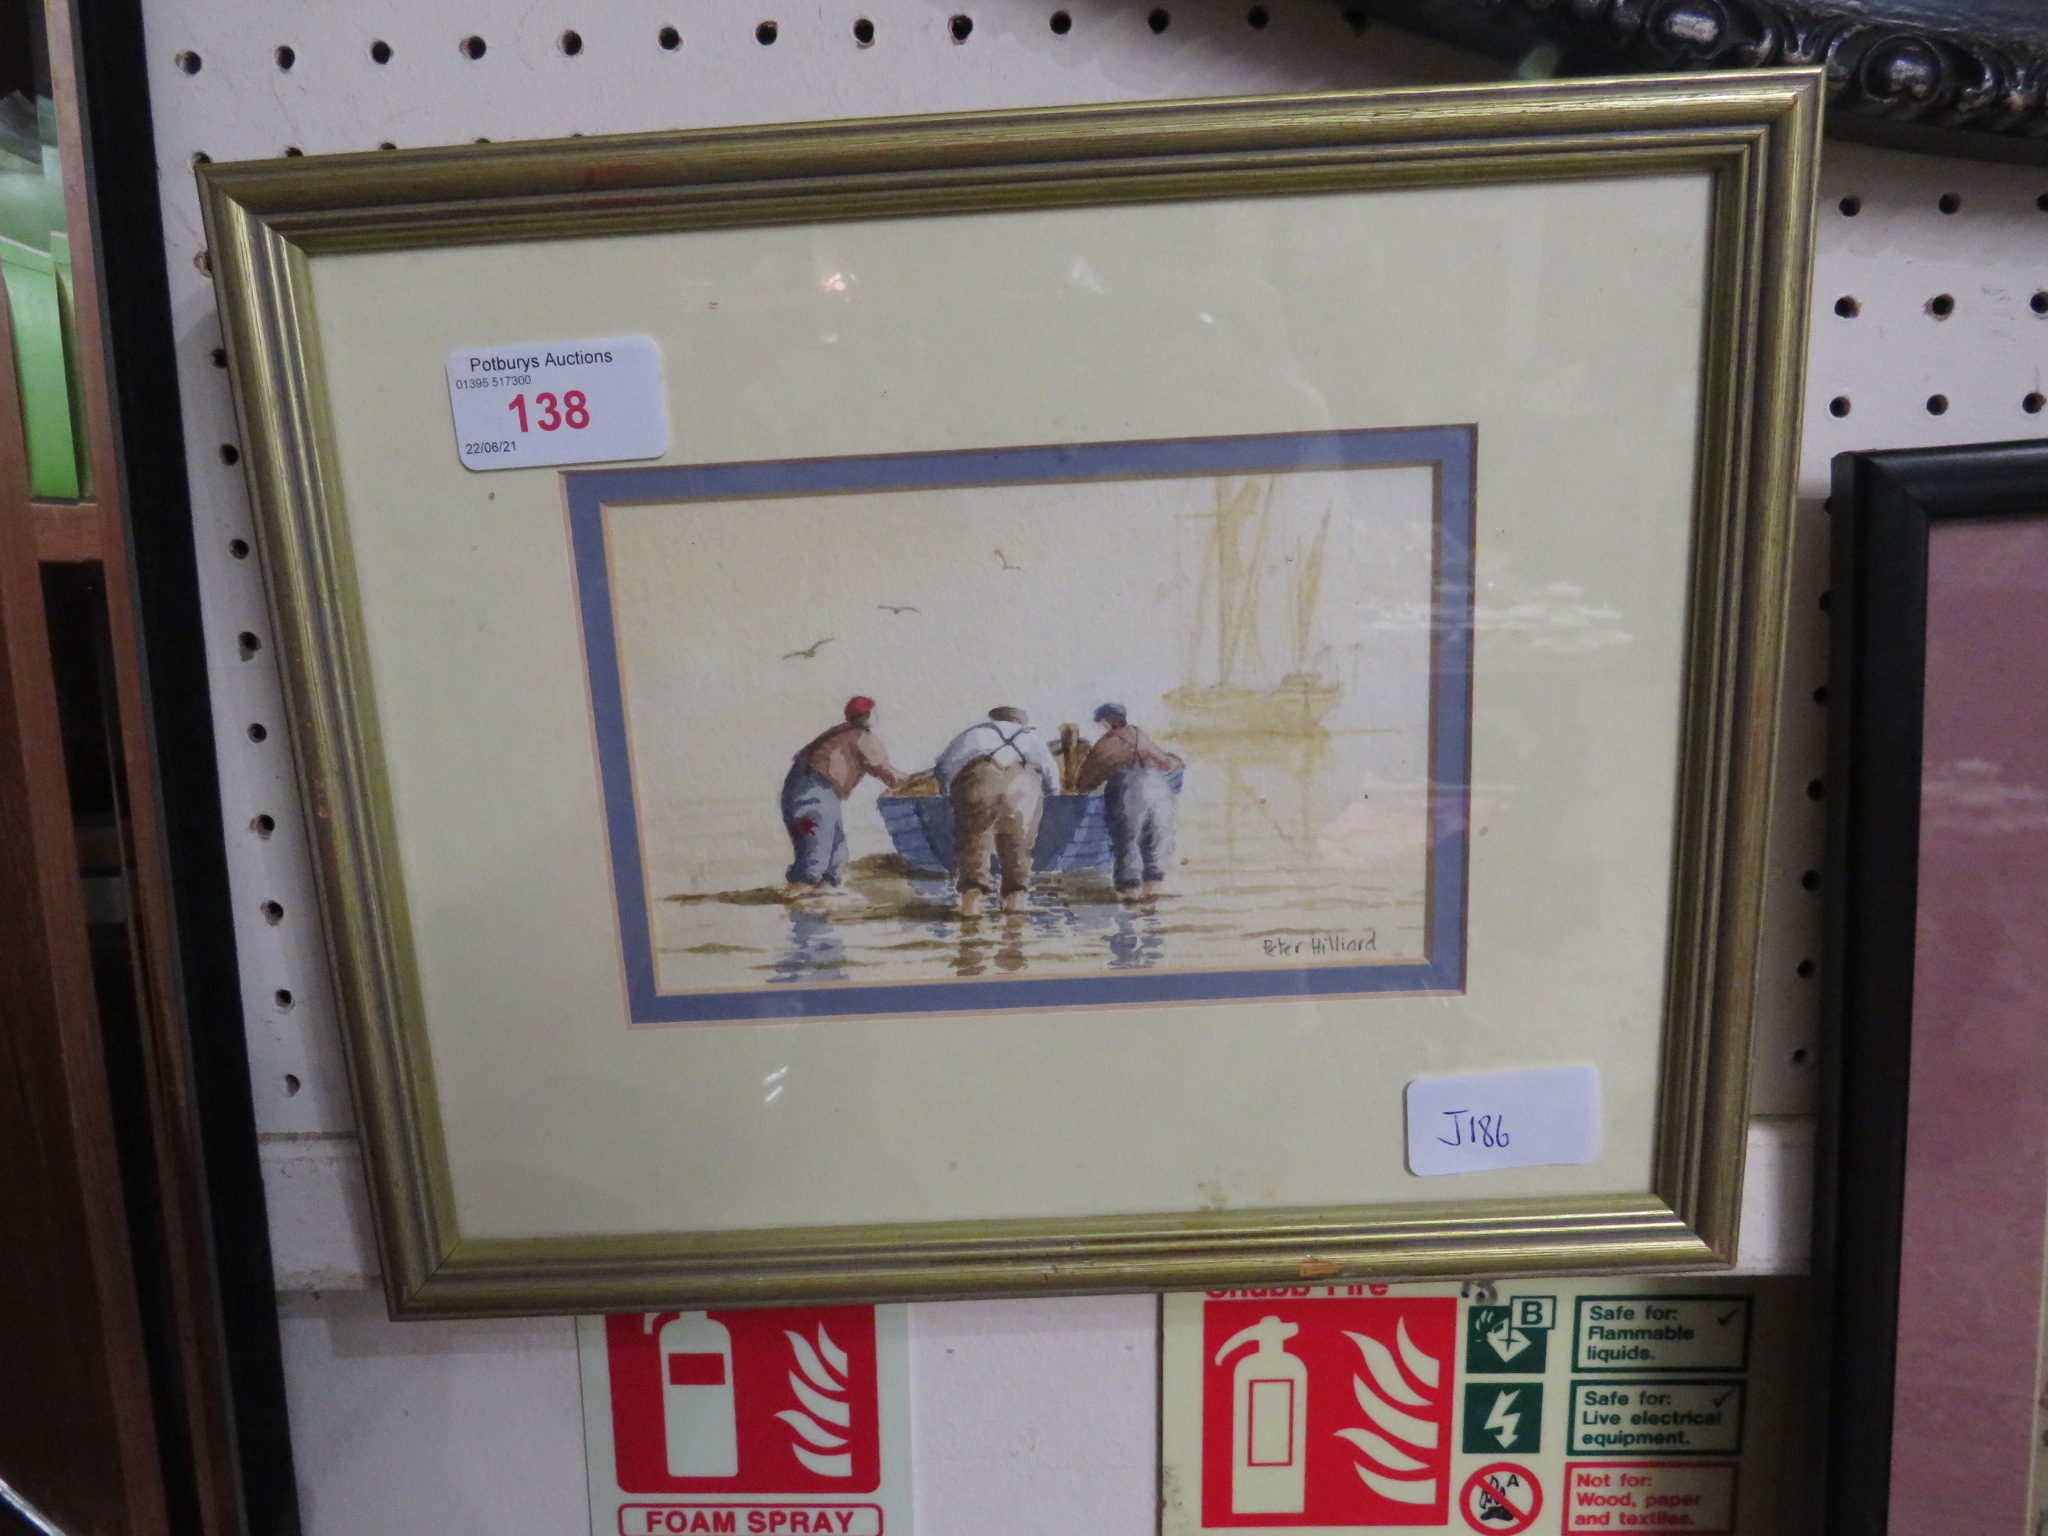 SMALL FRAMED AND GLAZED WATER COLOUR OF FISHERMAN SIGNED PETER HILLIARD.